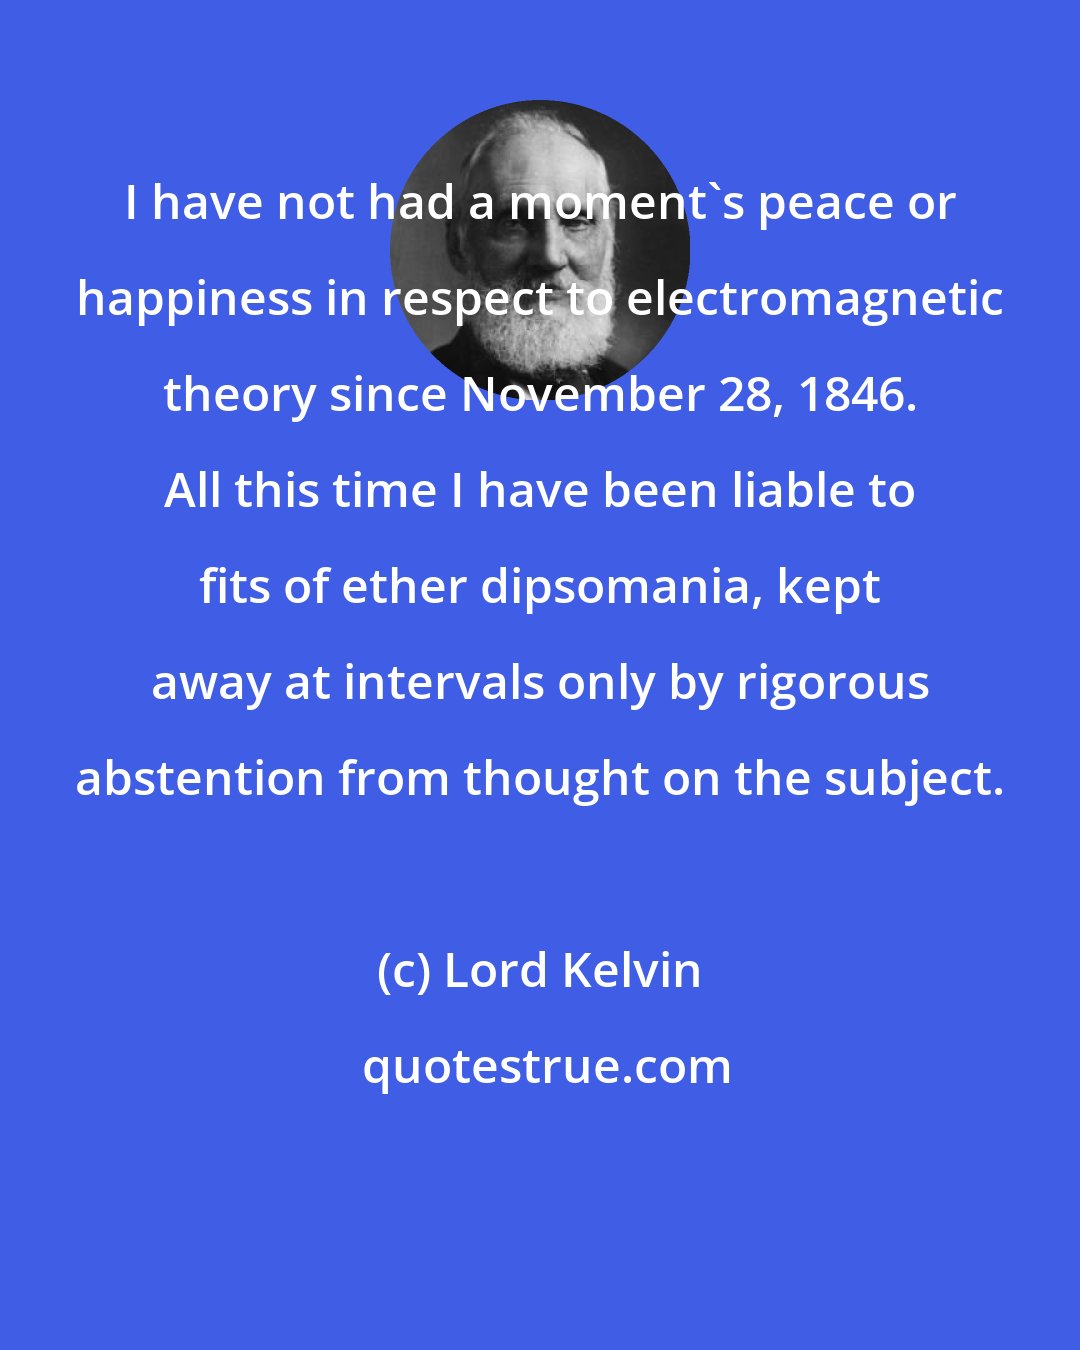 Lord Kelvin: I have not had a moment's peace or happiness in respect to electromagnetic theory since November 28, 1846. All this time I have been liable to fits of ether dipsomania, kept away at intervals only by rigorous abstention from thought on the subject.